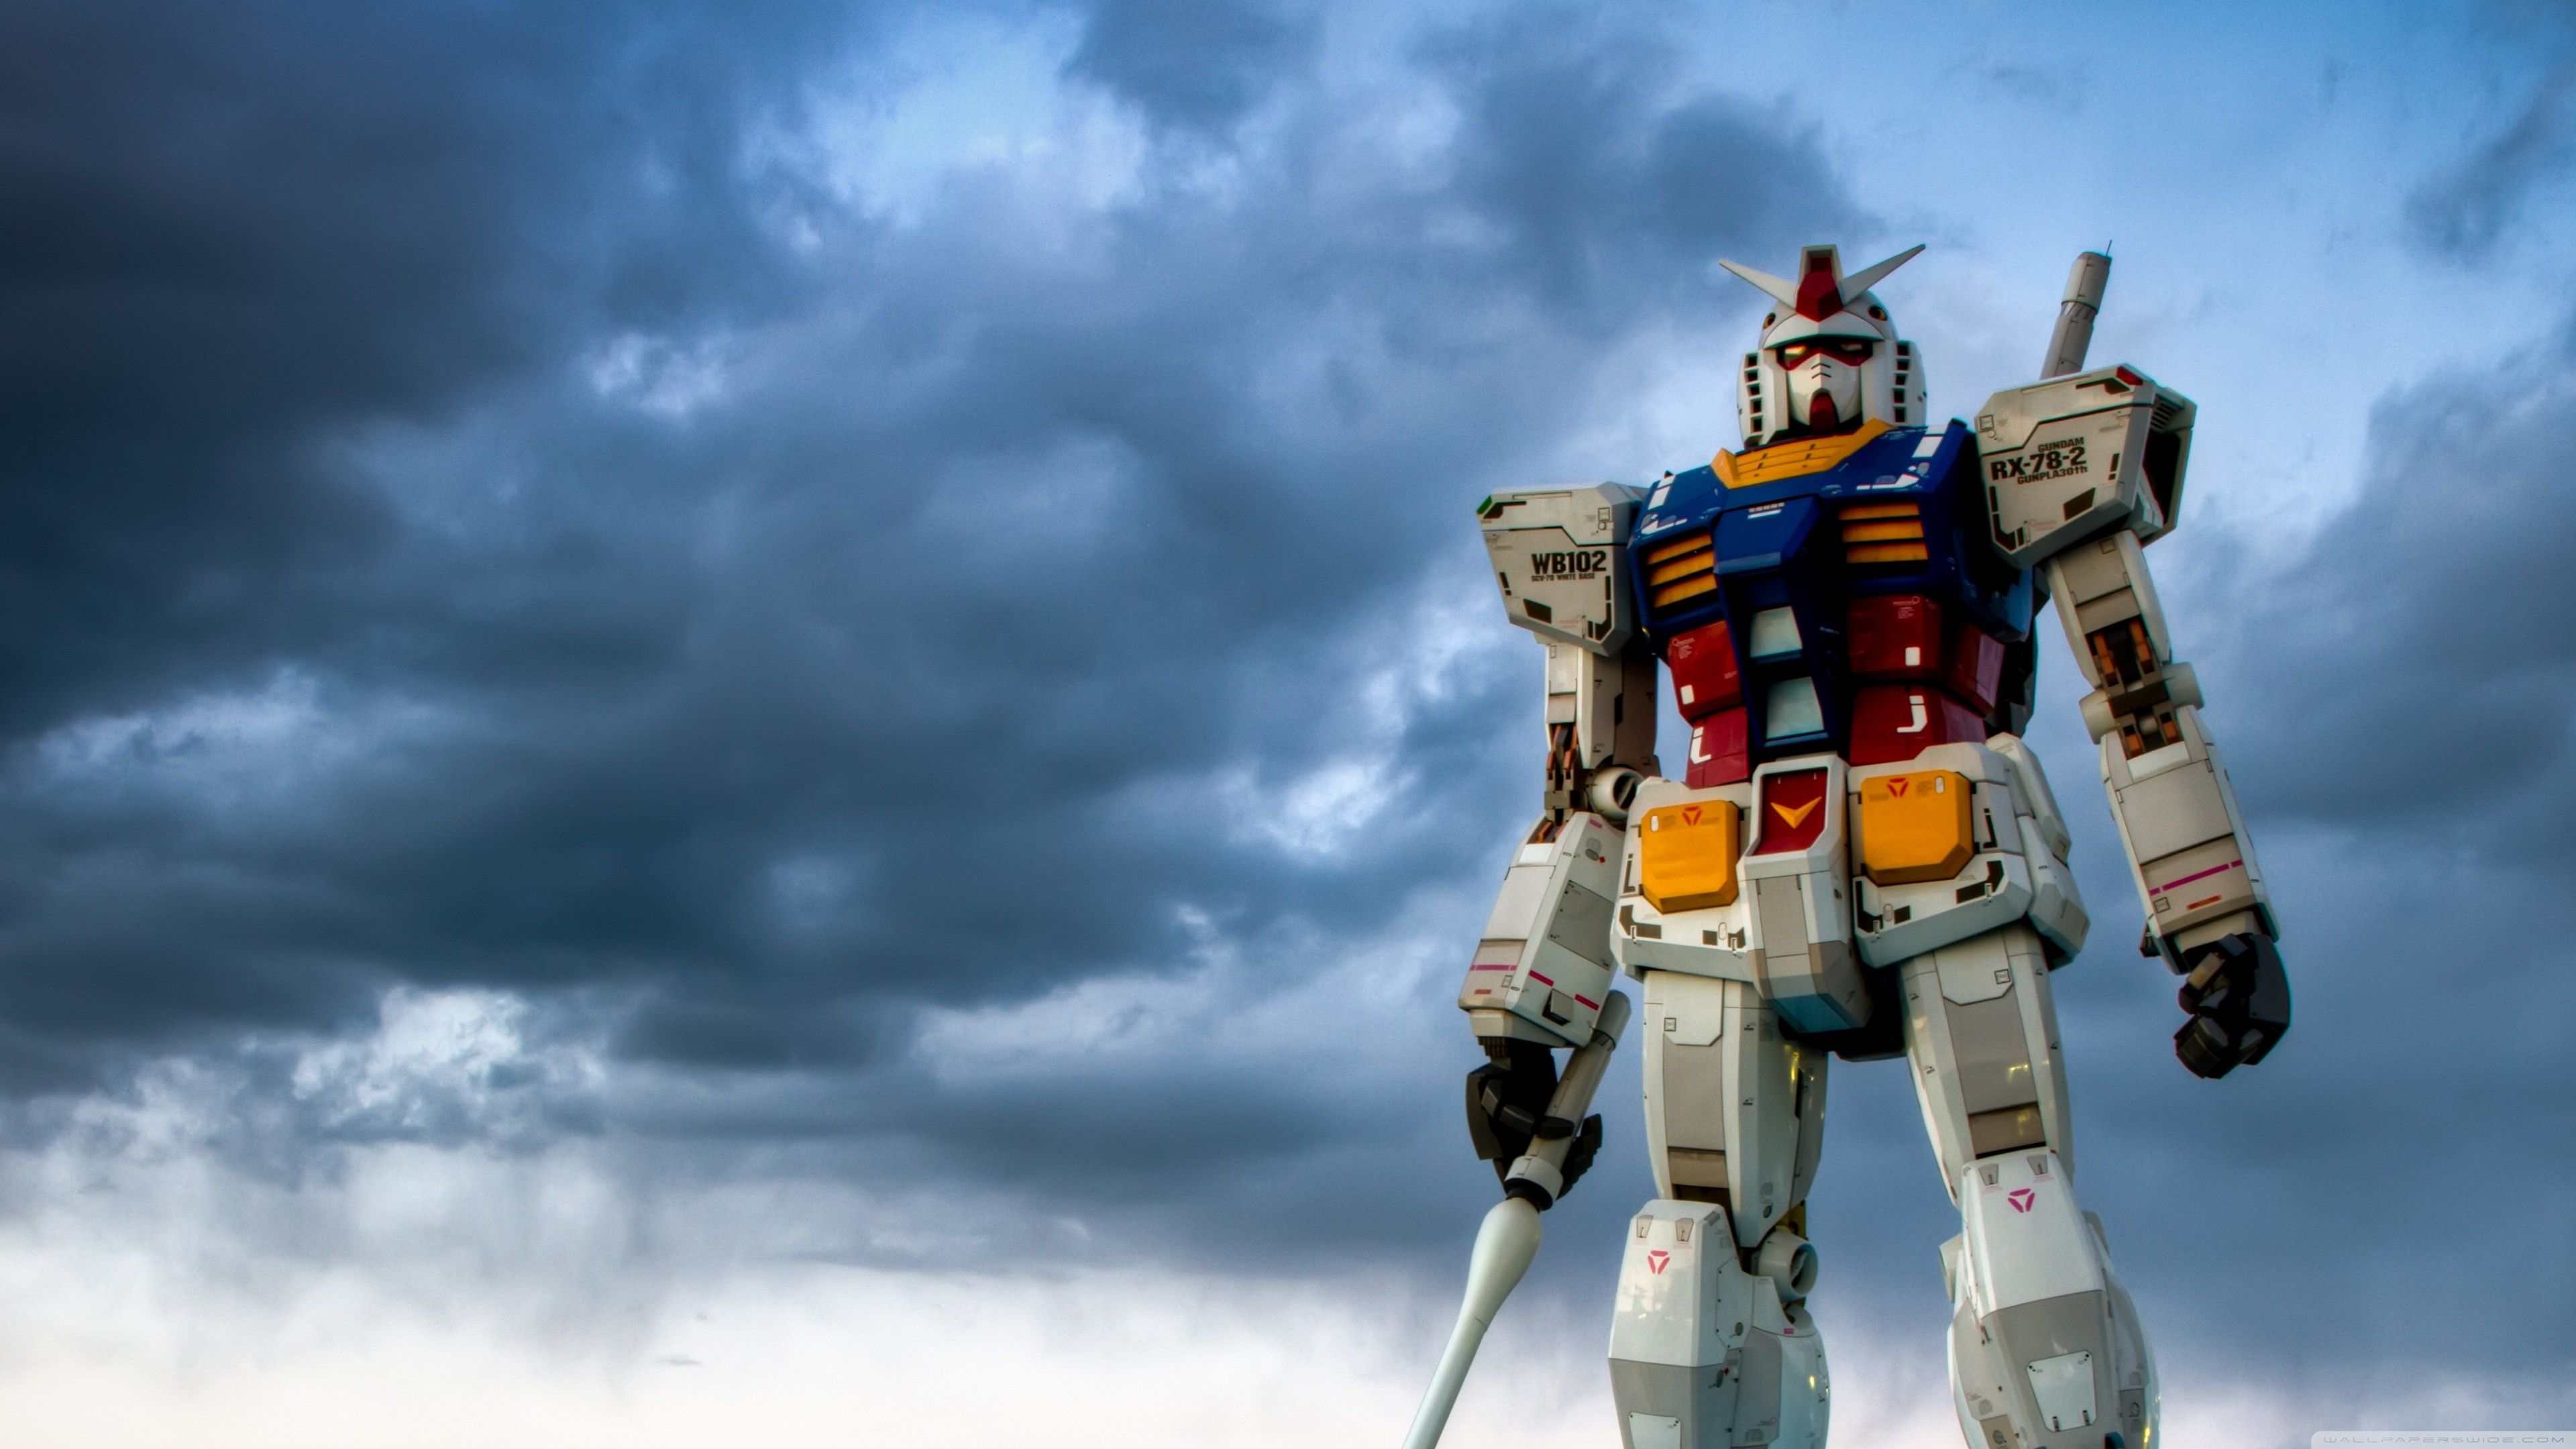 RX 78 Wallpaper Free RX 78 Background